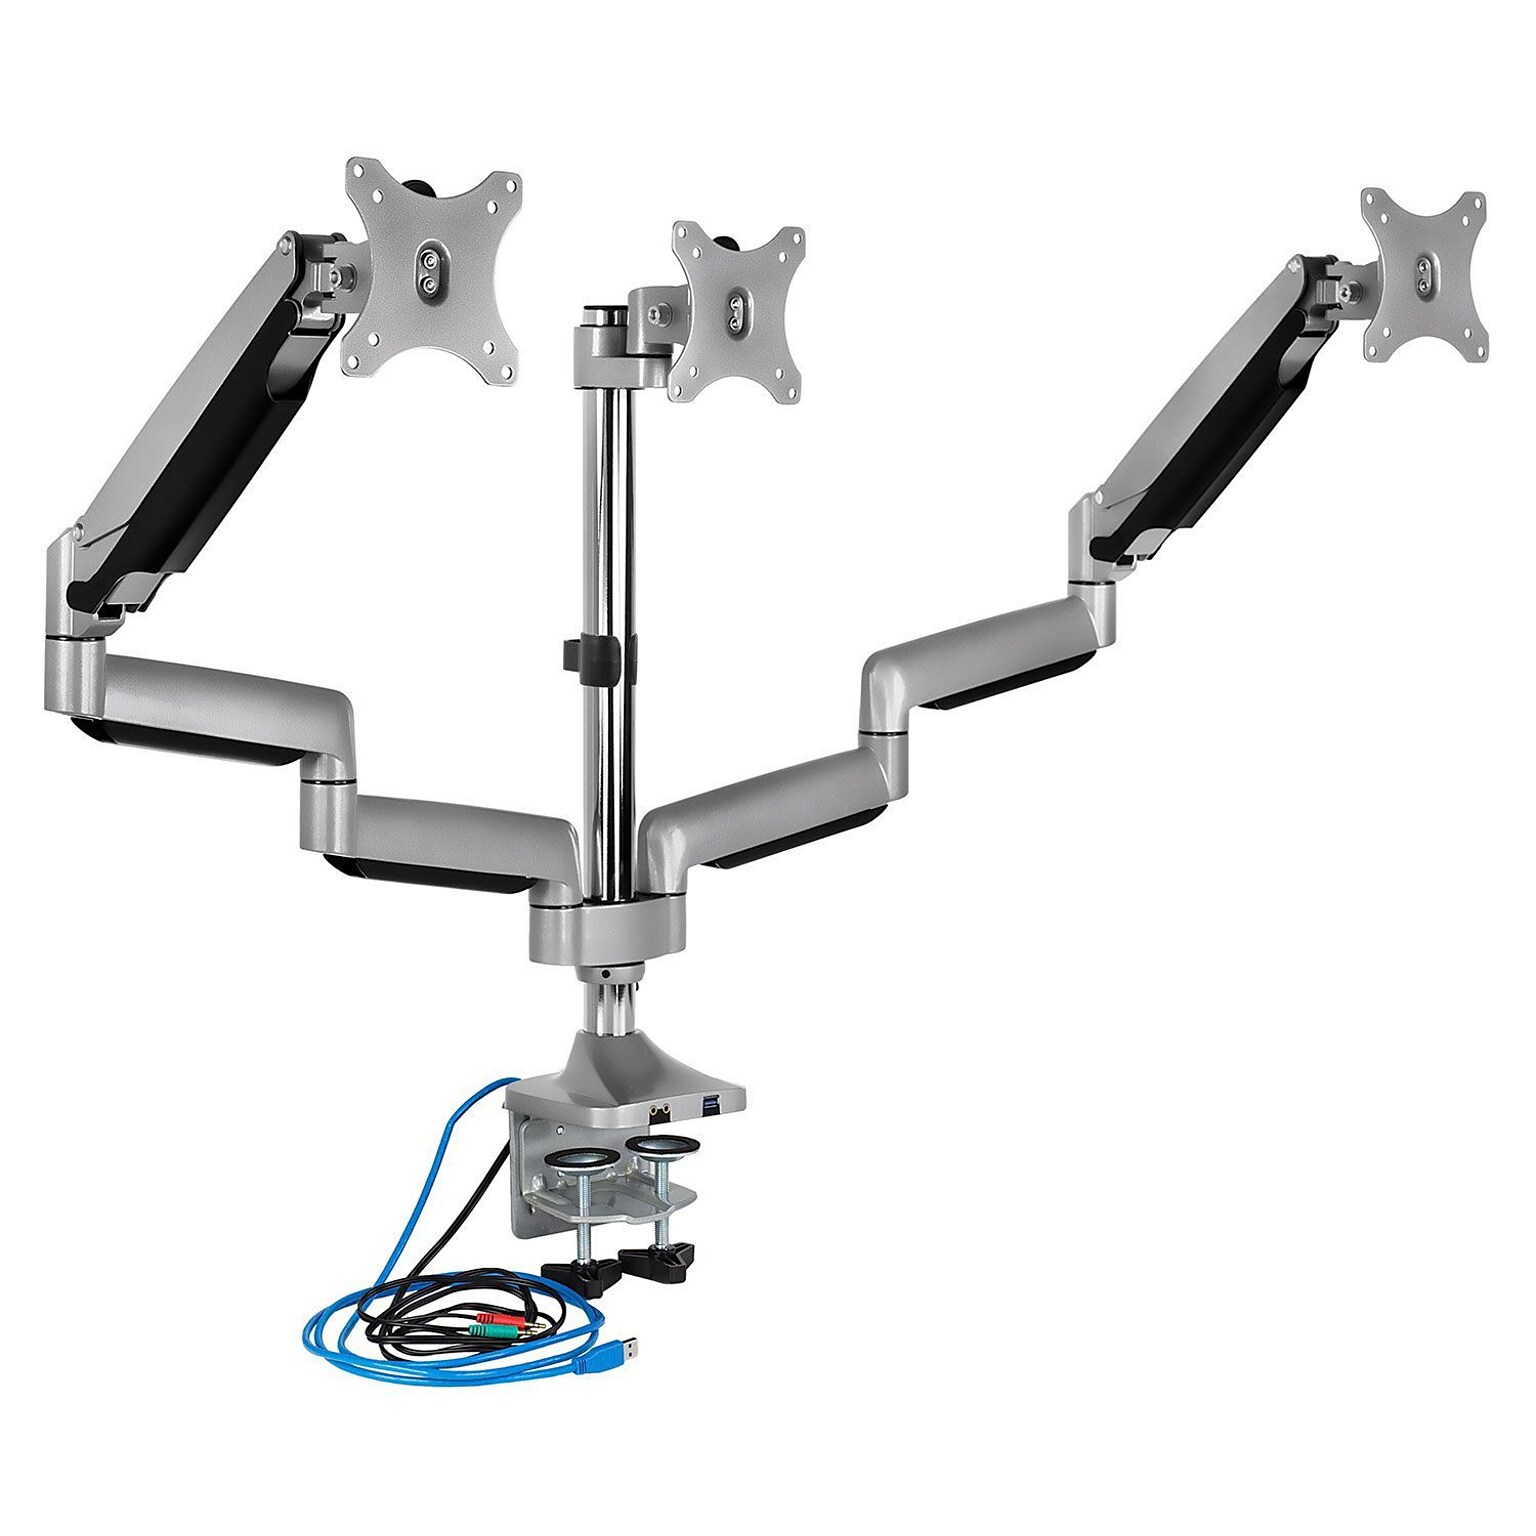 Mount-It! Height Adjustable Triple Monitor Mount Arms with USB Port for 24 to 32 Displays (MI-2753)